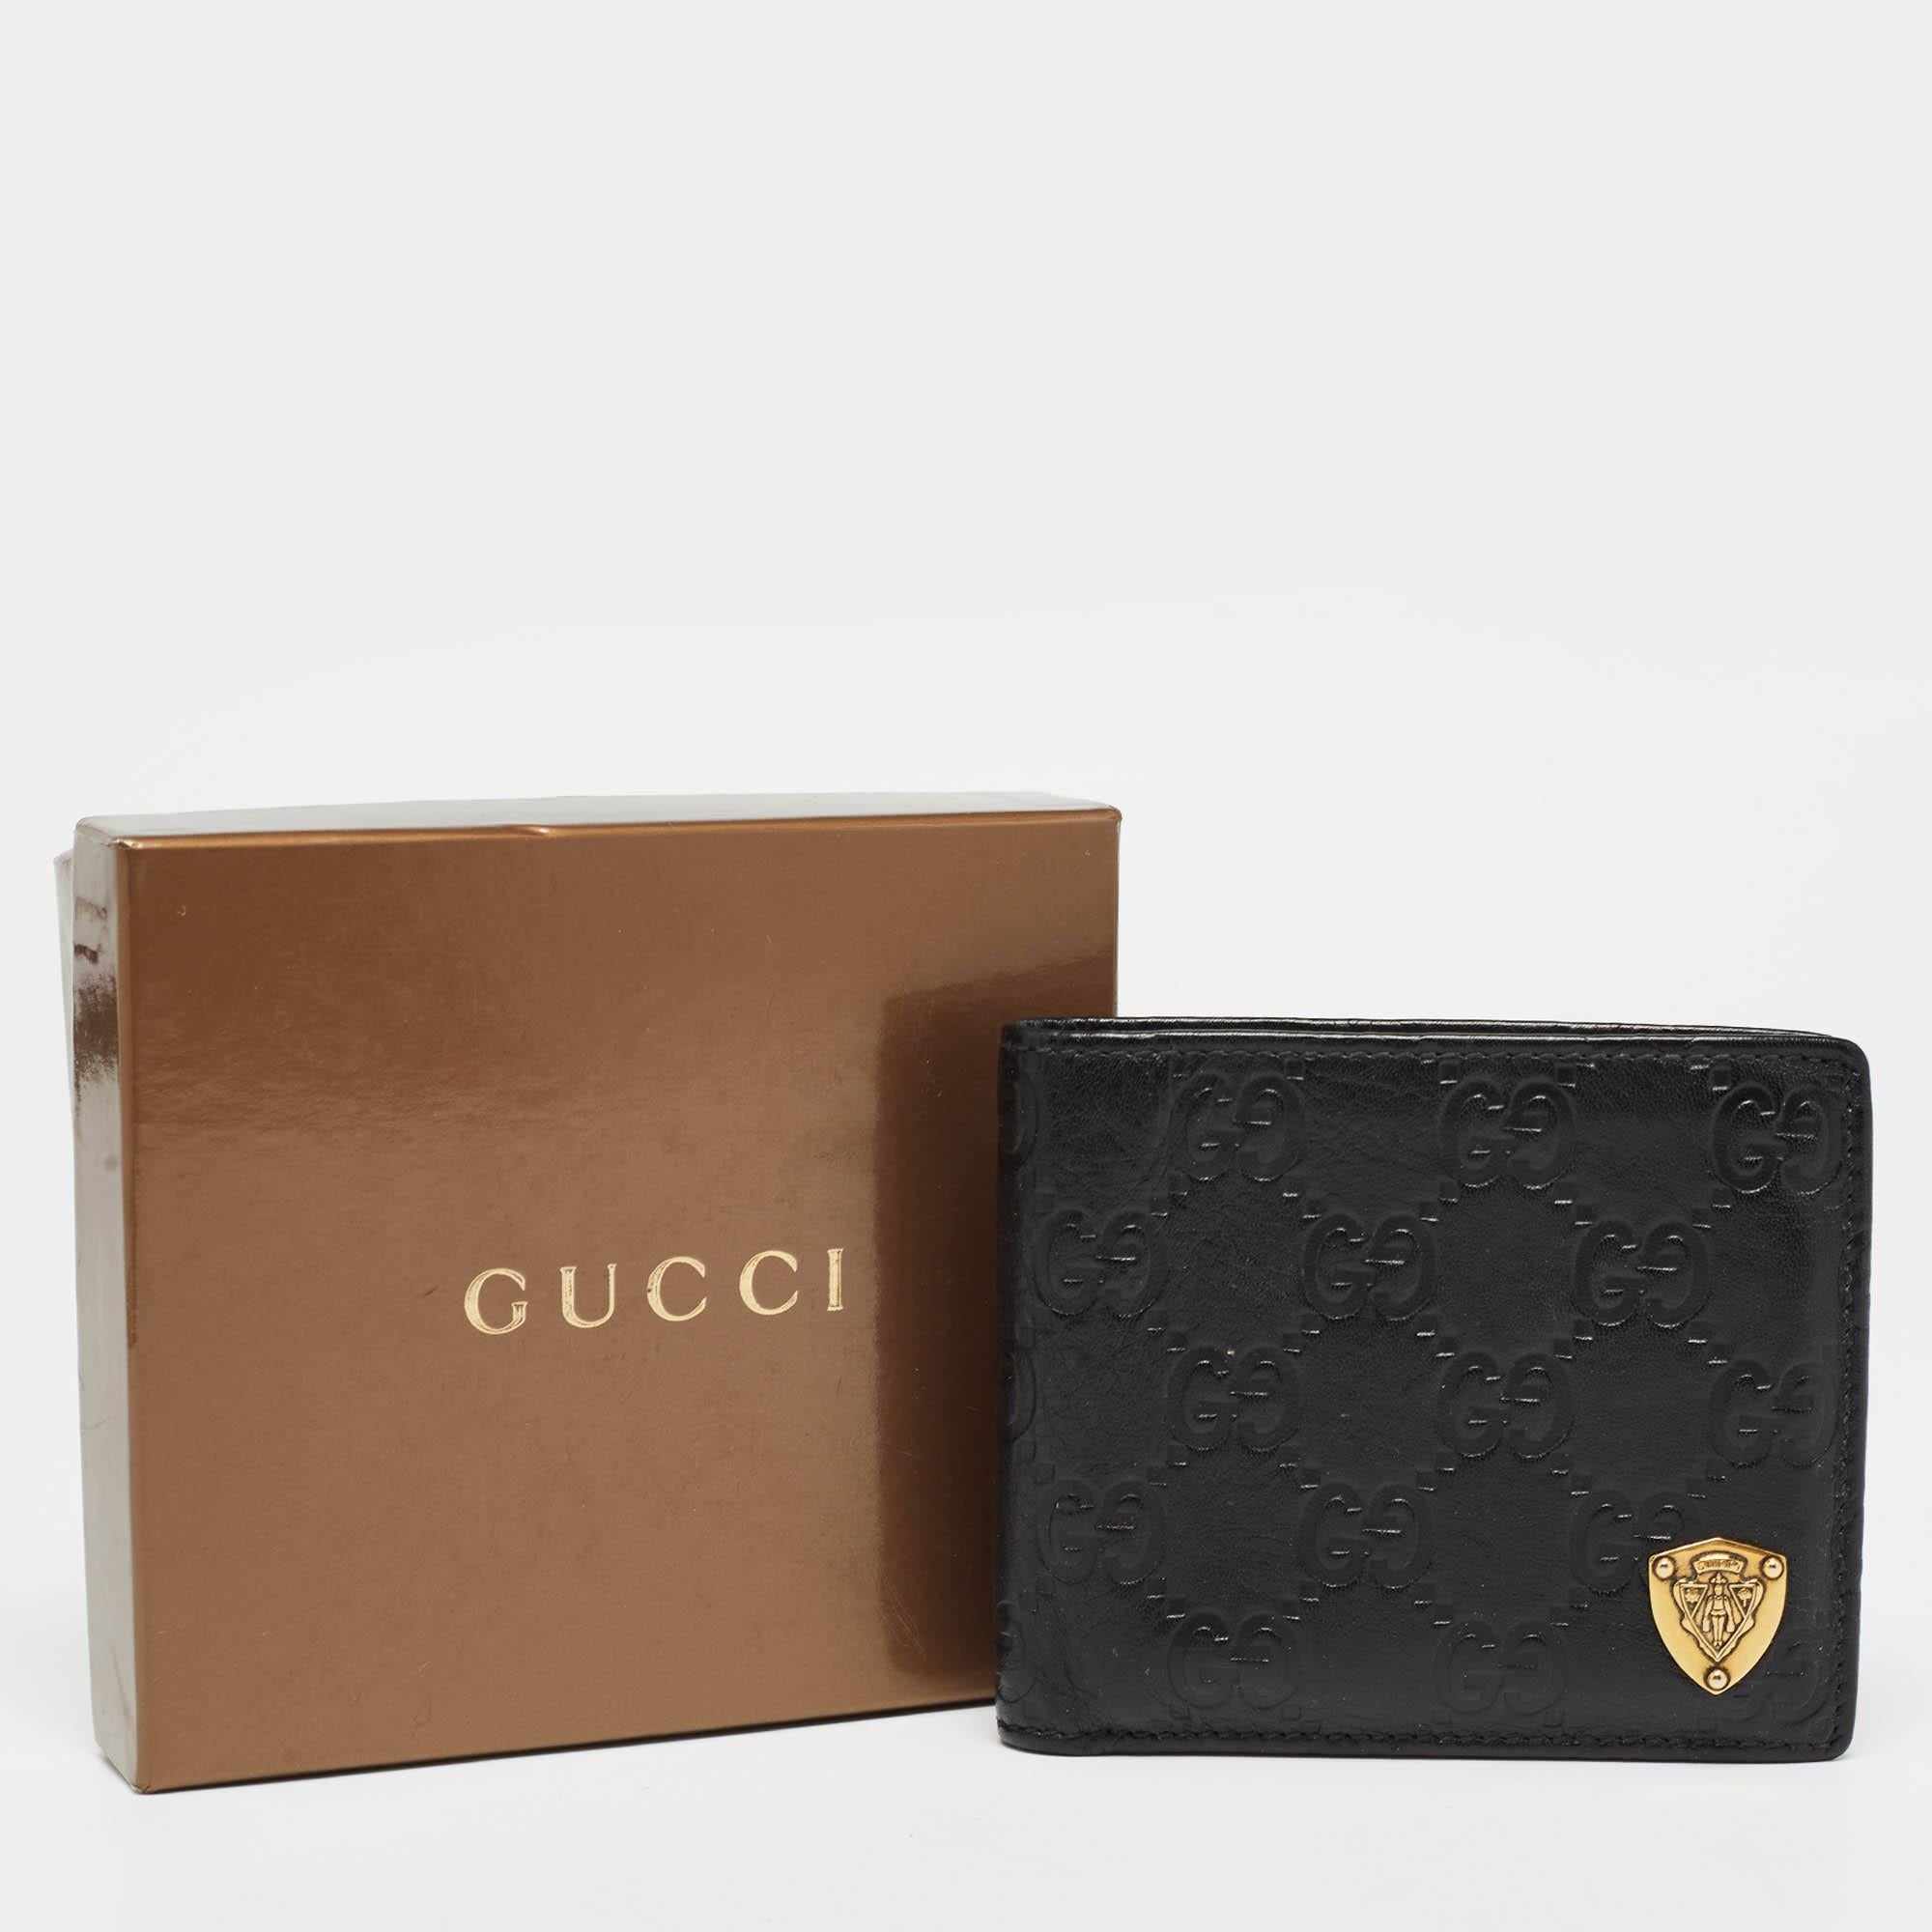 Gucci Black Guccissima Leather Crest Bifold Wallet For Sale 9